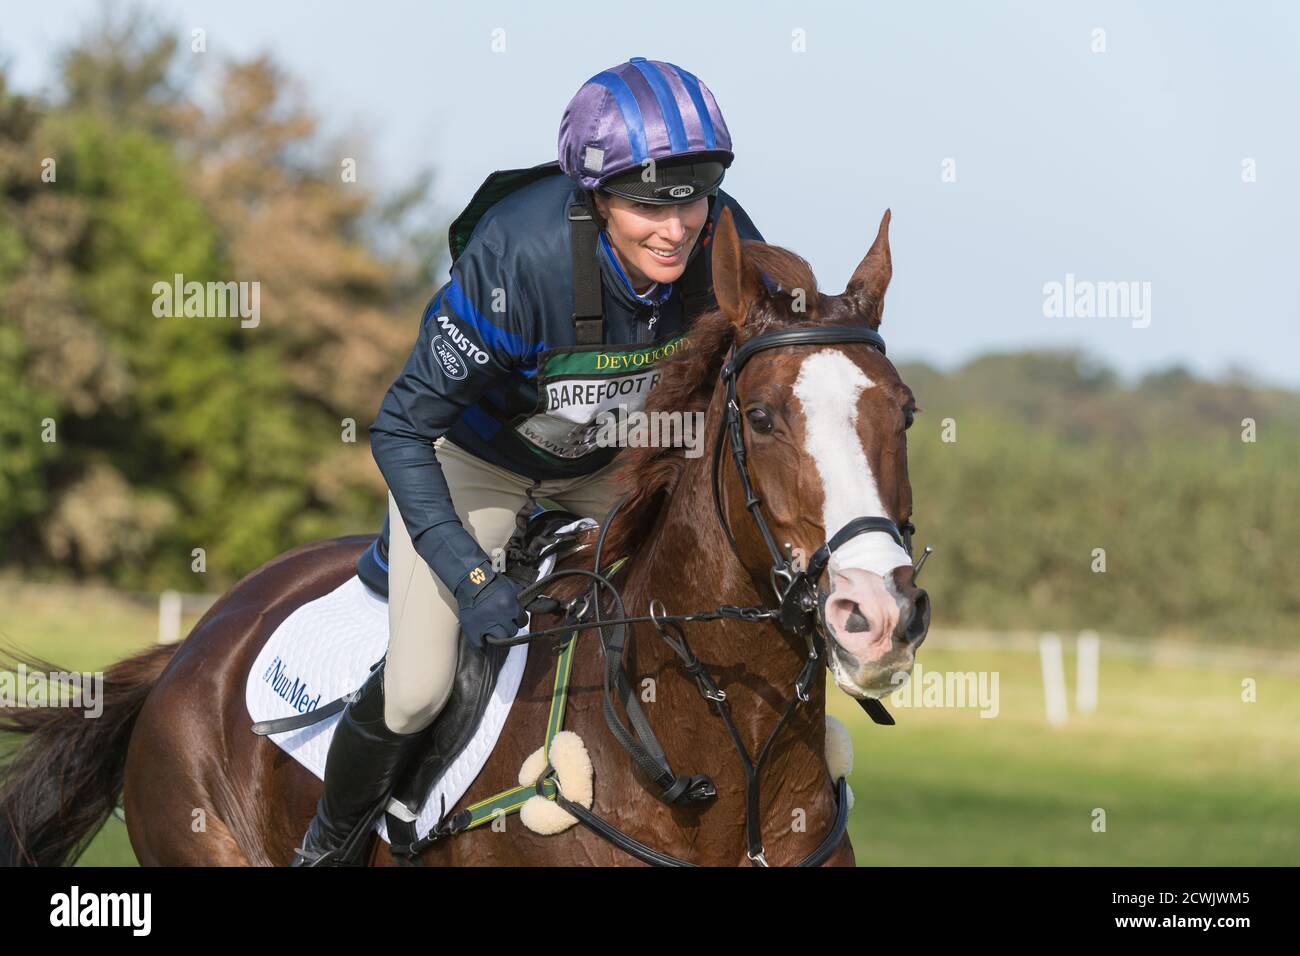 ZARA TINDALL AND CLASS AFFAIR TAKING PART IN THE CROSS COUNTRY PHASE OF THE CCI4*-L COMPETITION AT THE BAREFOOT RETREAT BURNHAM MARKET HORSE TRIALS Stock Photo